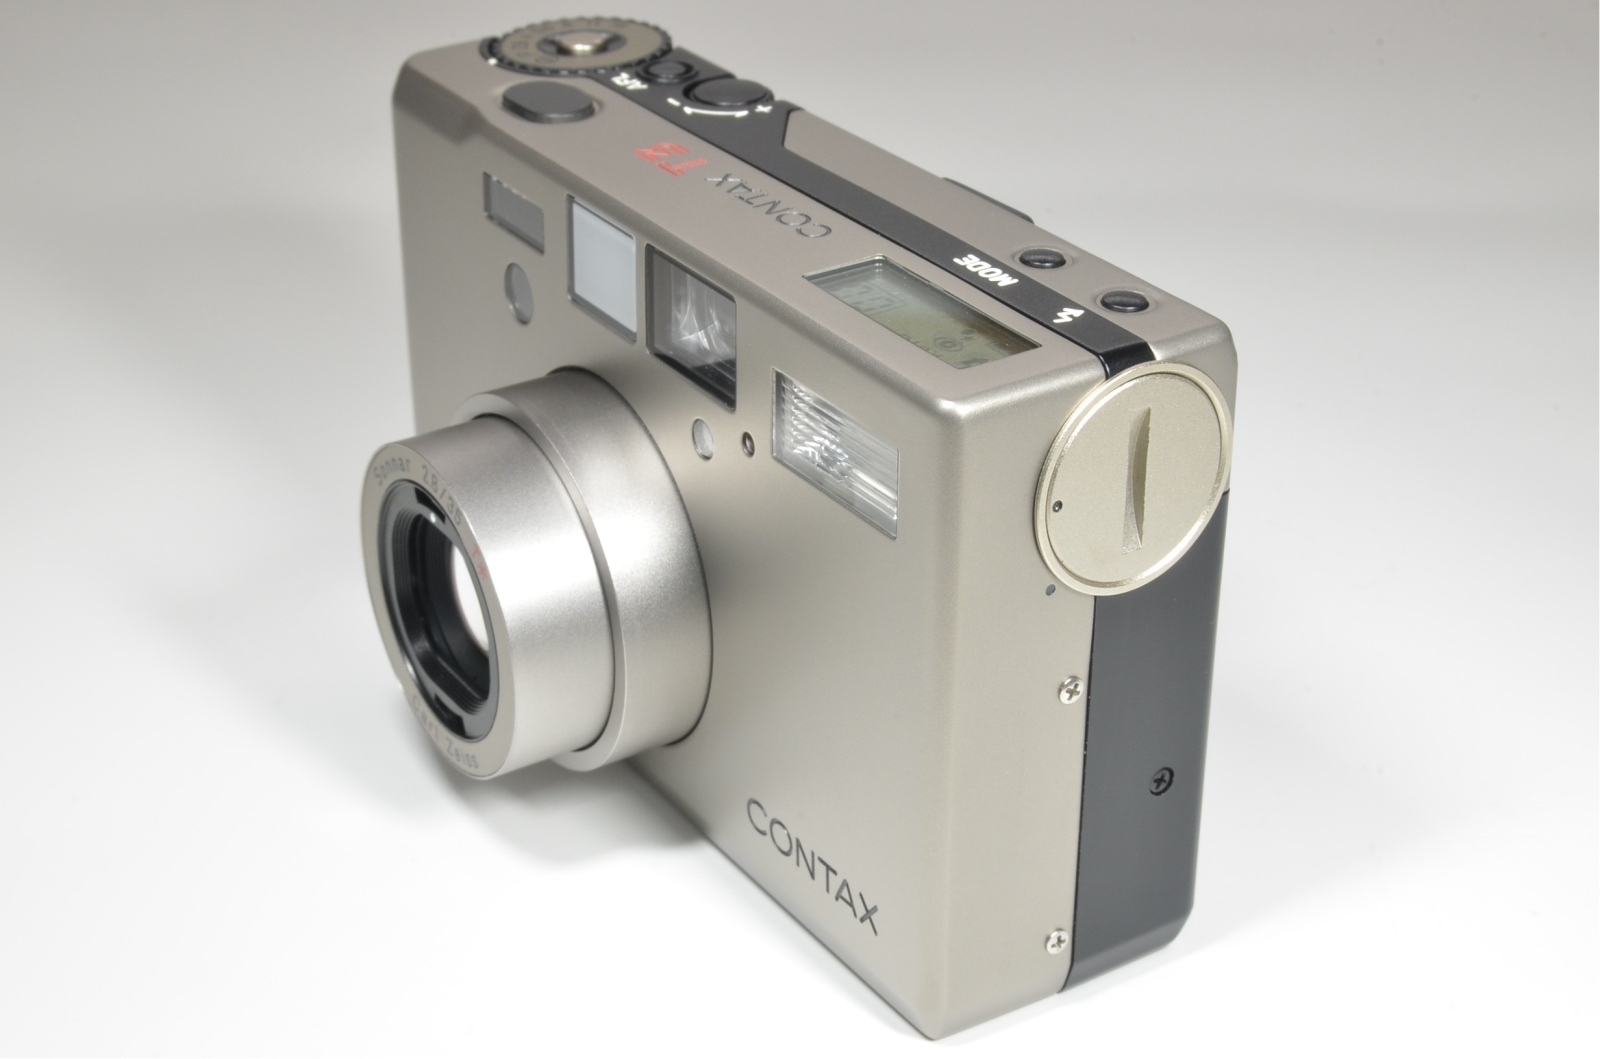 contax t3 p&s 35mm film camera with hood and 4 lens filters